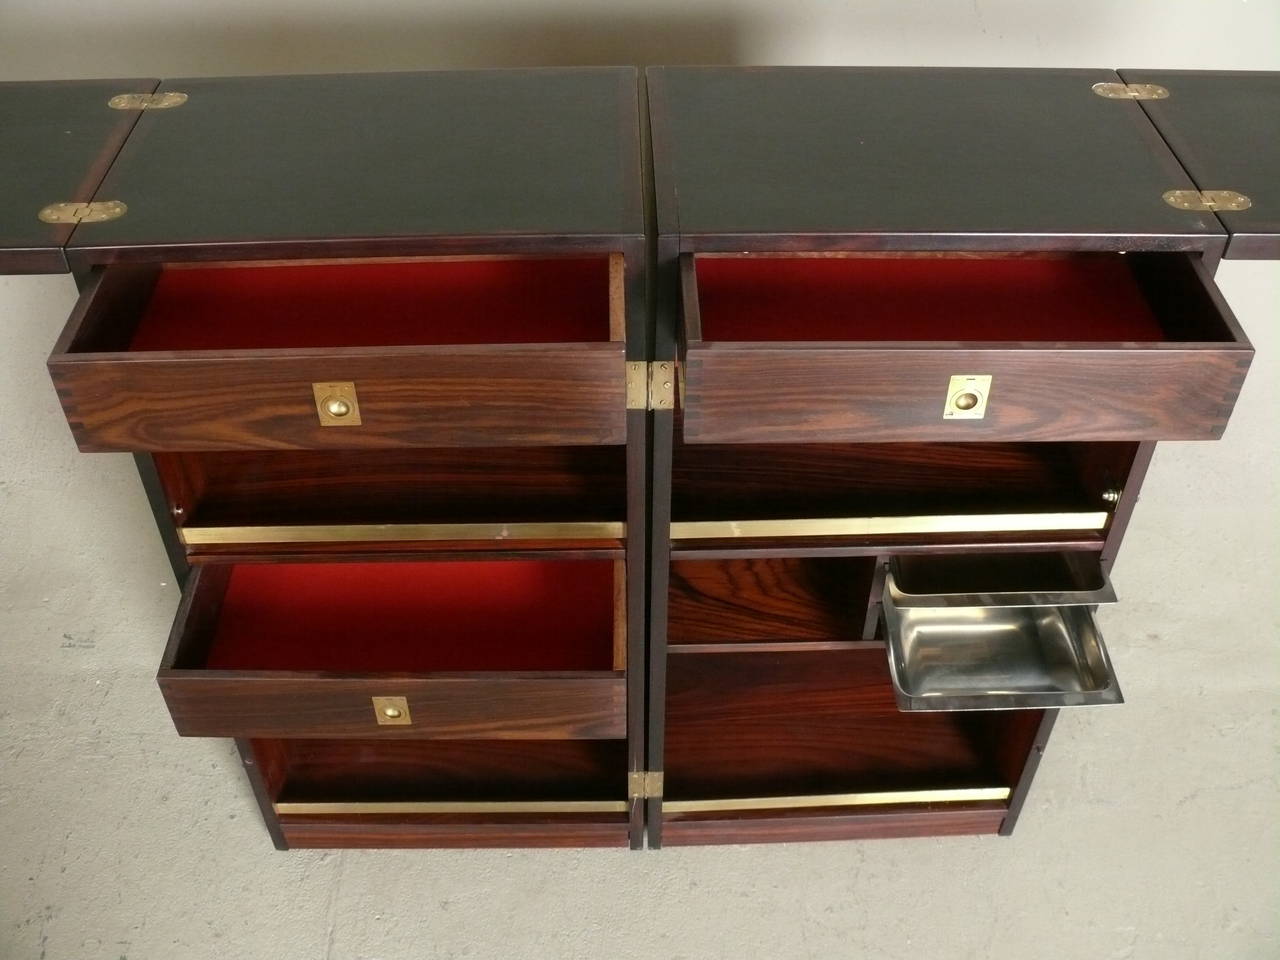 1960s Rosewood folding bar unit designed for Skovby, Denmark in beautiful condition.  Compact folding cube opens to a stunning rosewood dry bar with brass accents, drawers for storage, and stainless condiment trays.  Stainless trays marked Stelton,